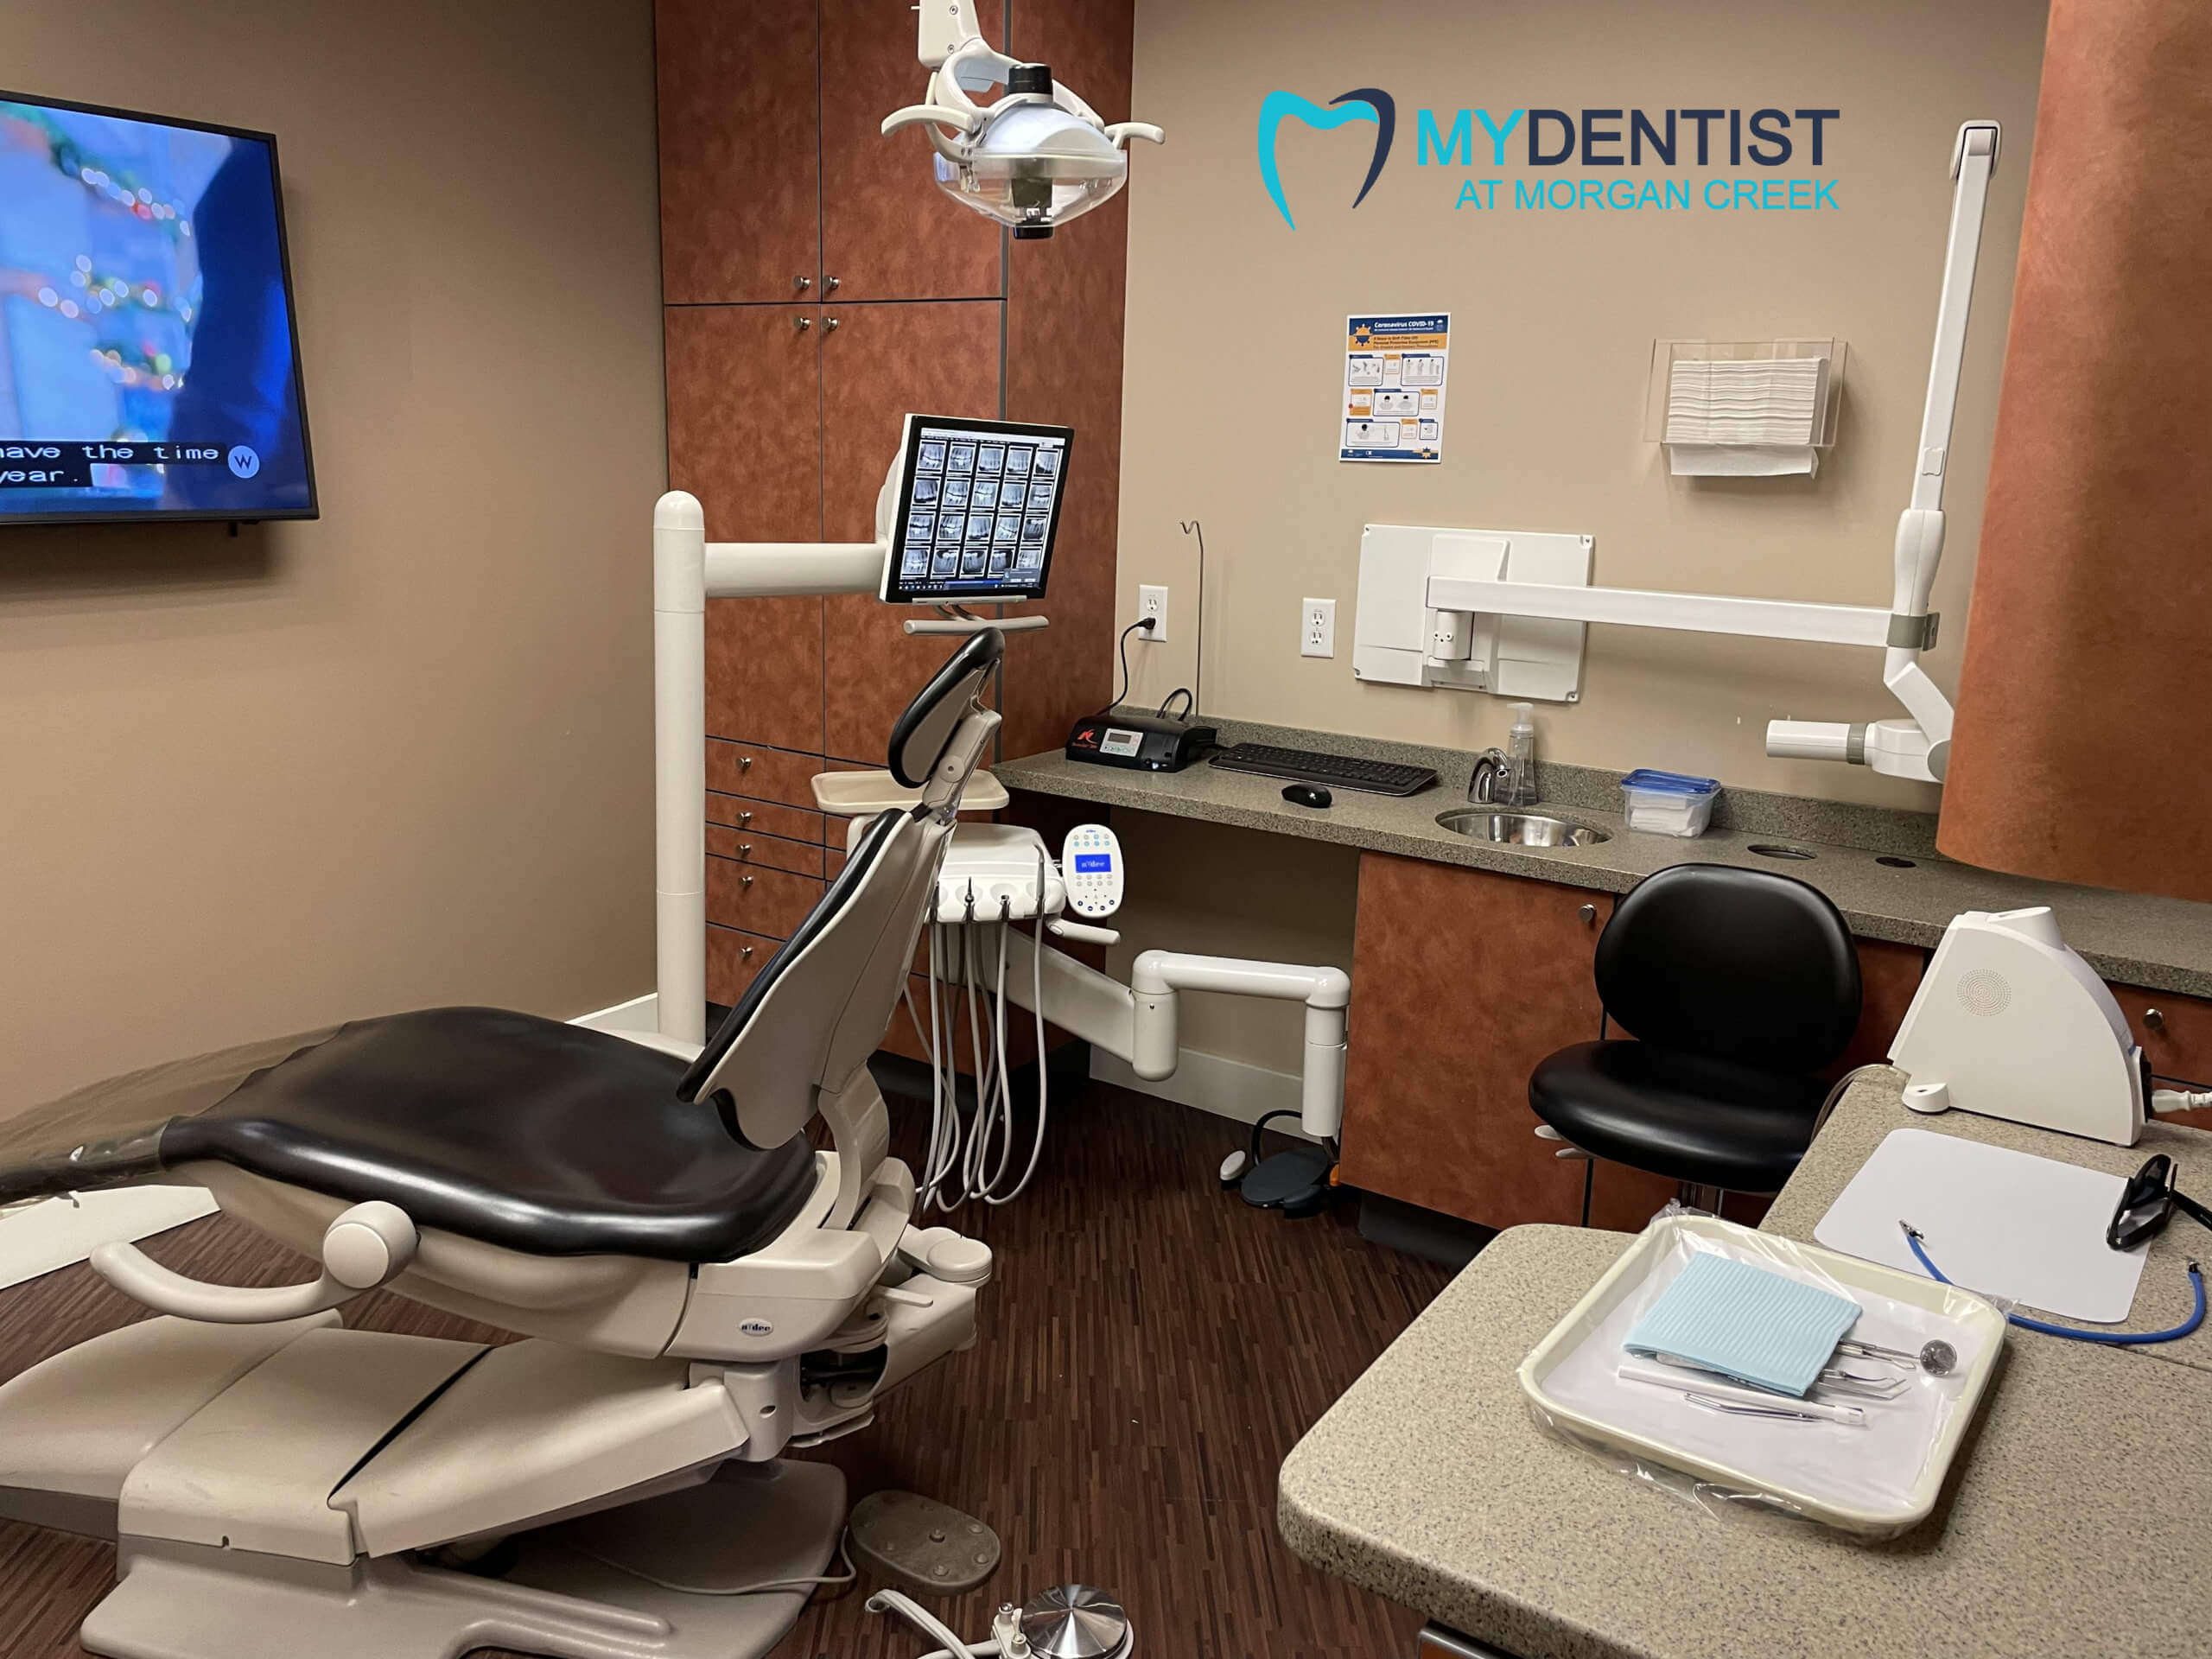 My-Dentist-at-Morgan-Creek-South-Surrey-Dental-Treatment-Room - Choosing - Your - New - Dentist - with - confidence